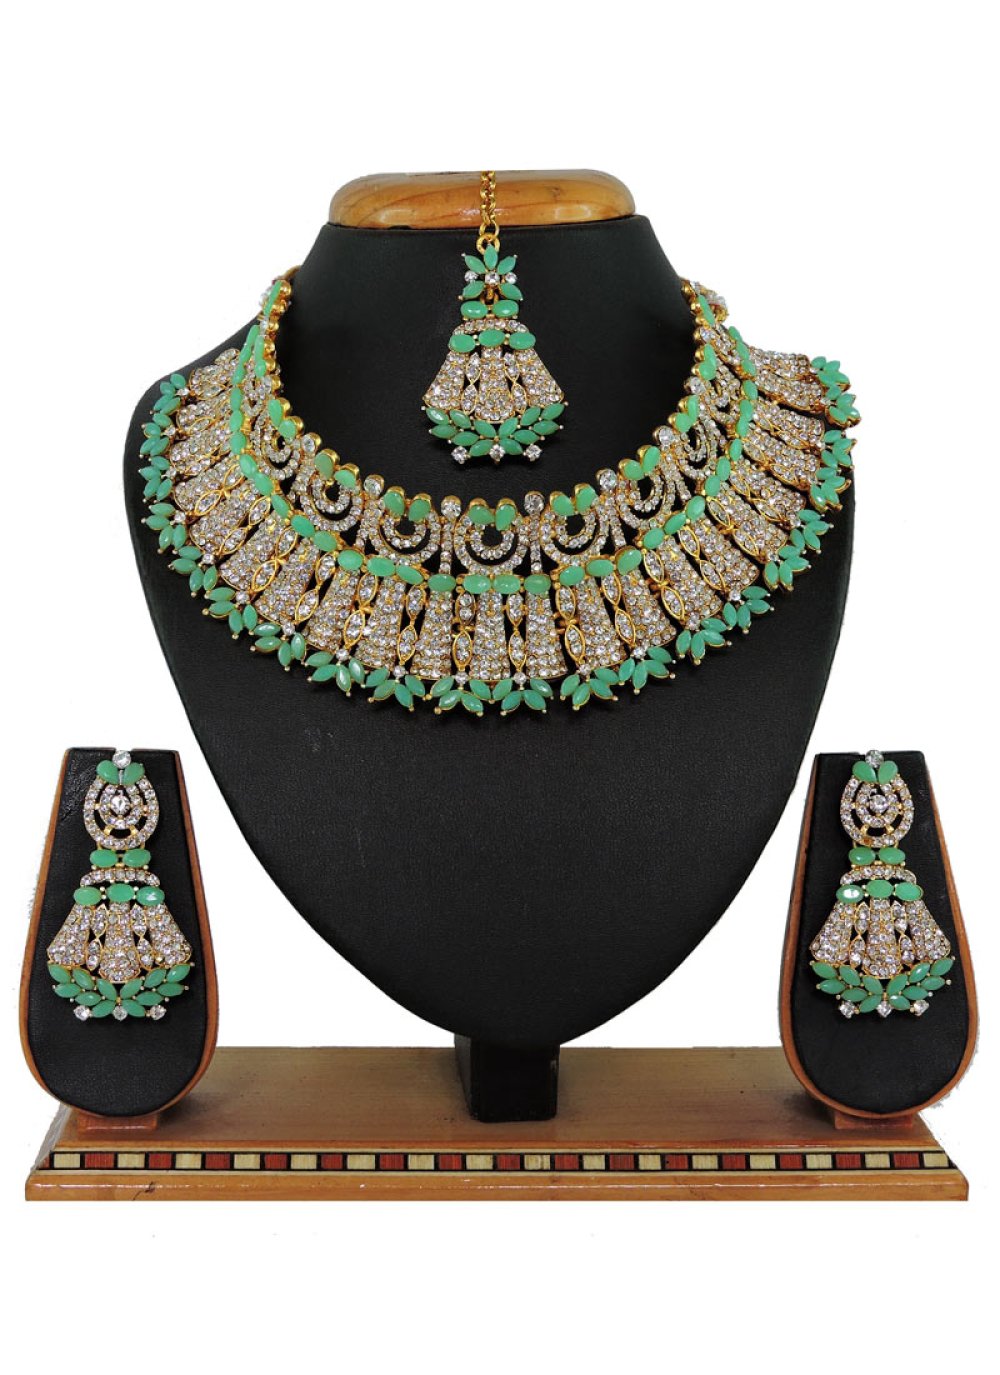 Alluring Alloy Stone Work Sea Green and White Necklace Set